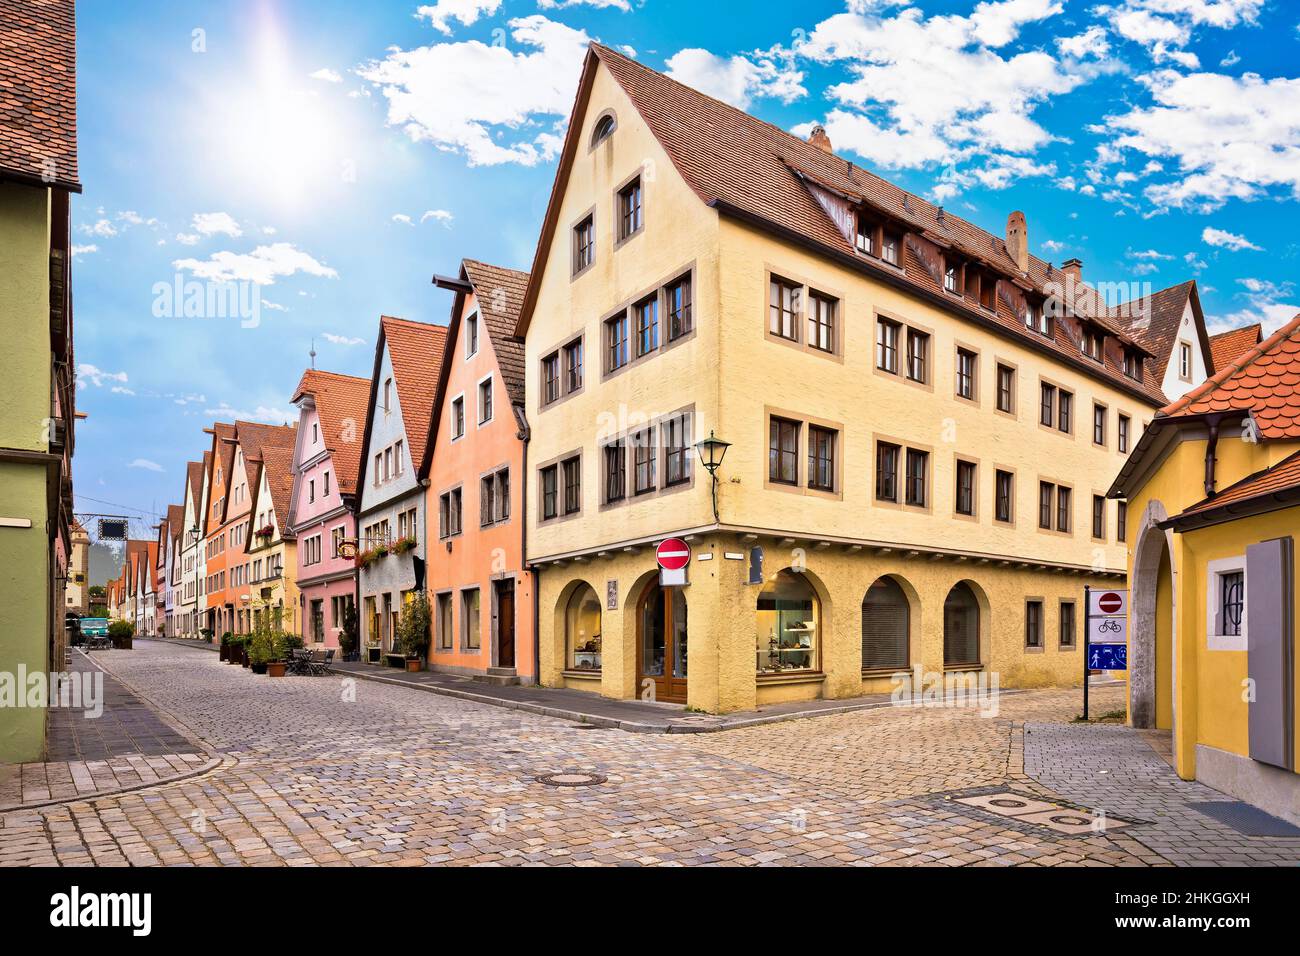 Rothenburg ob der Tauber. Cobbled colorful street and architecture of old town of Rothenburg ob der Tauber, Romantic road of Bavaria region of Germany Stock Photo